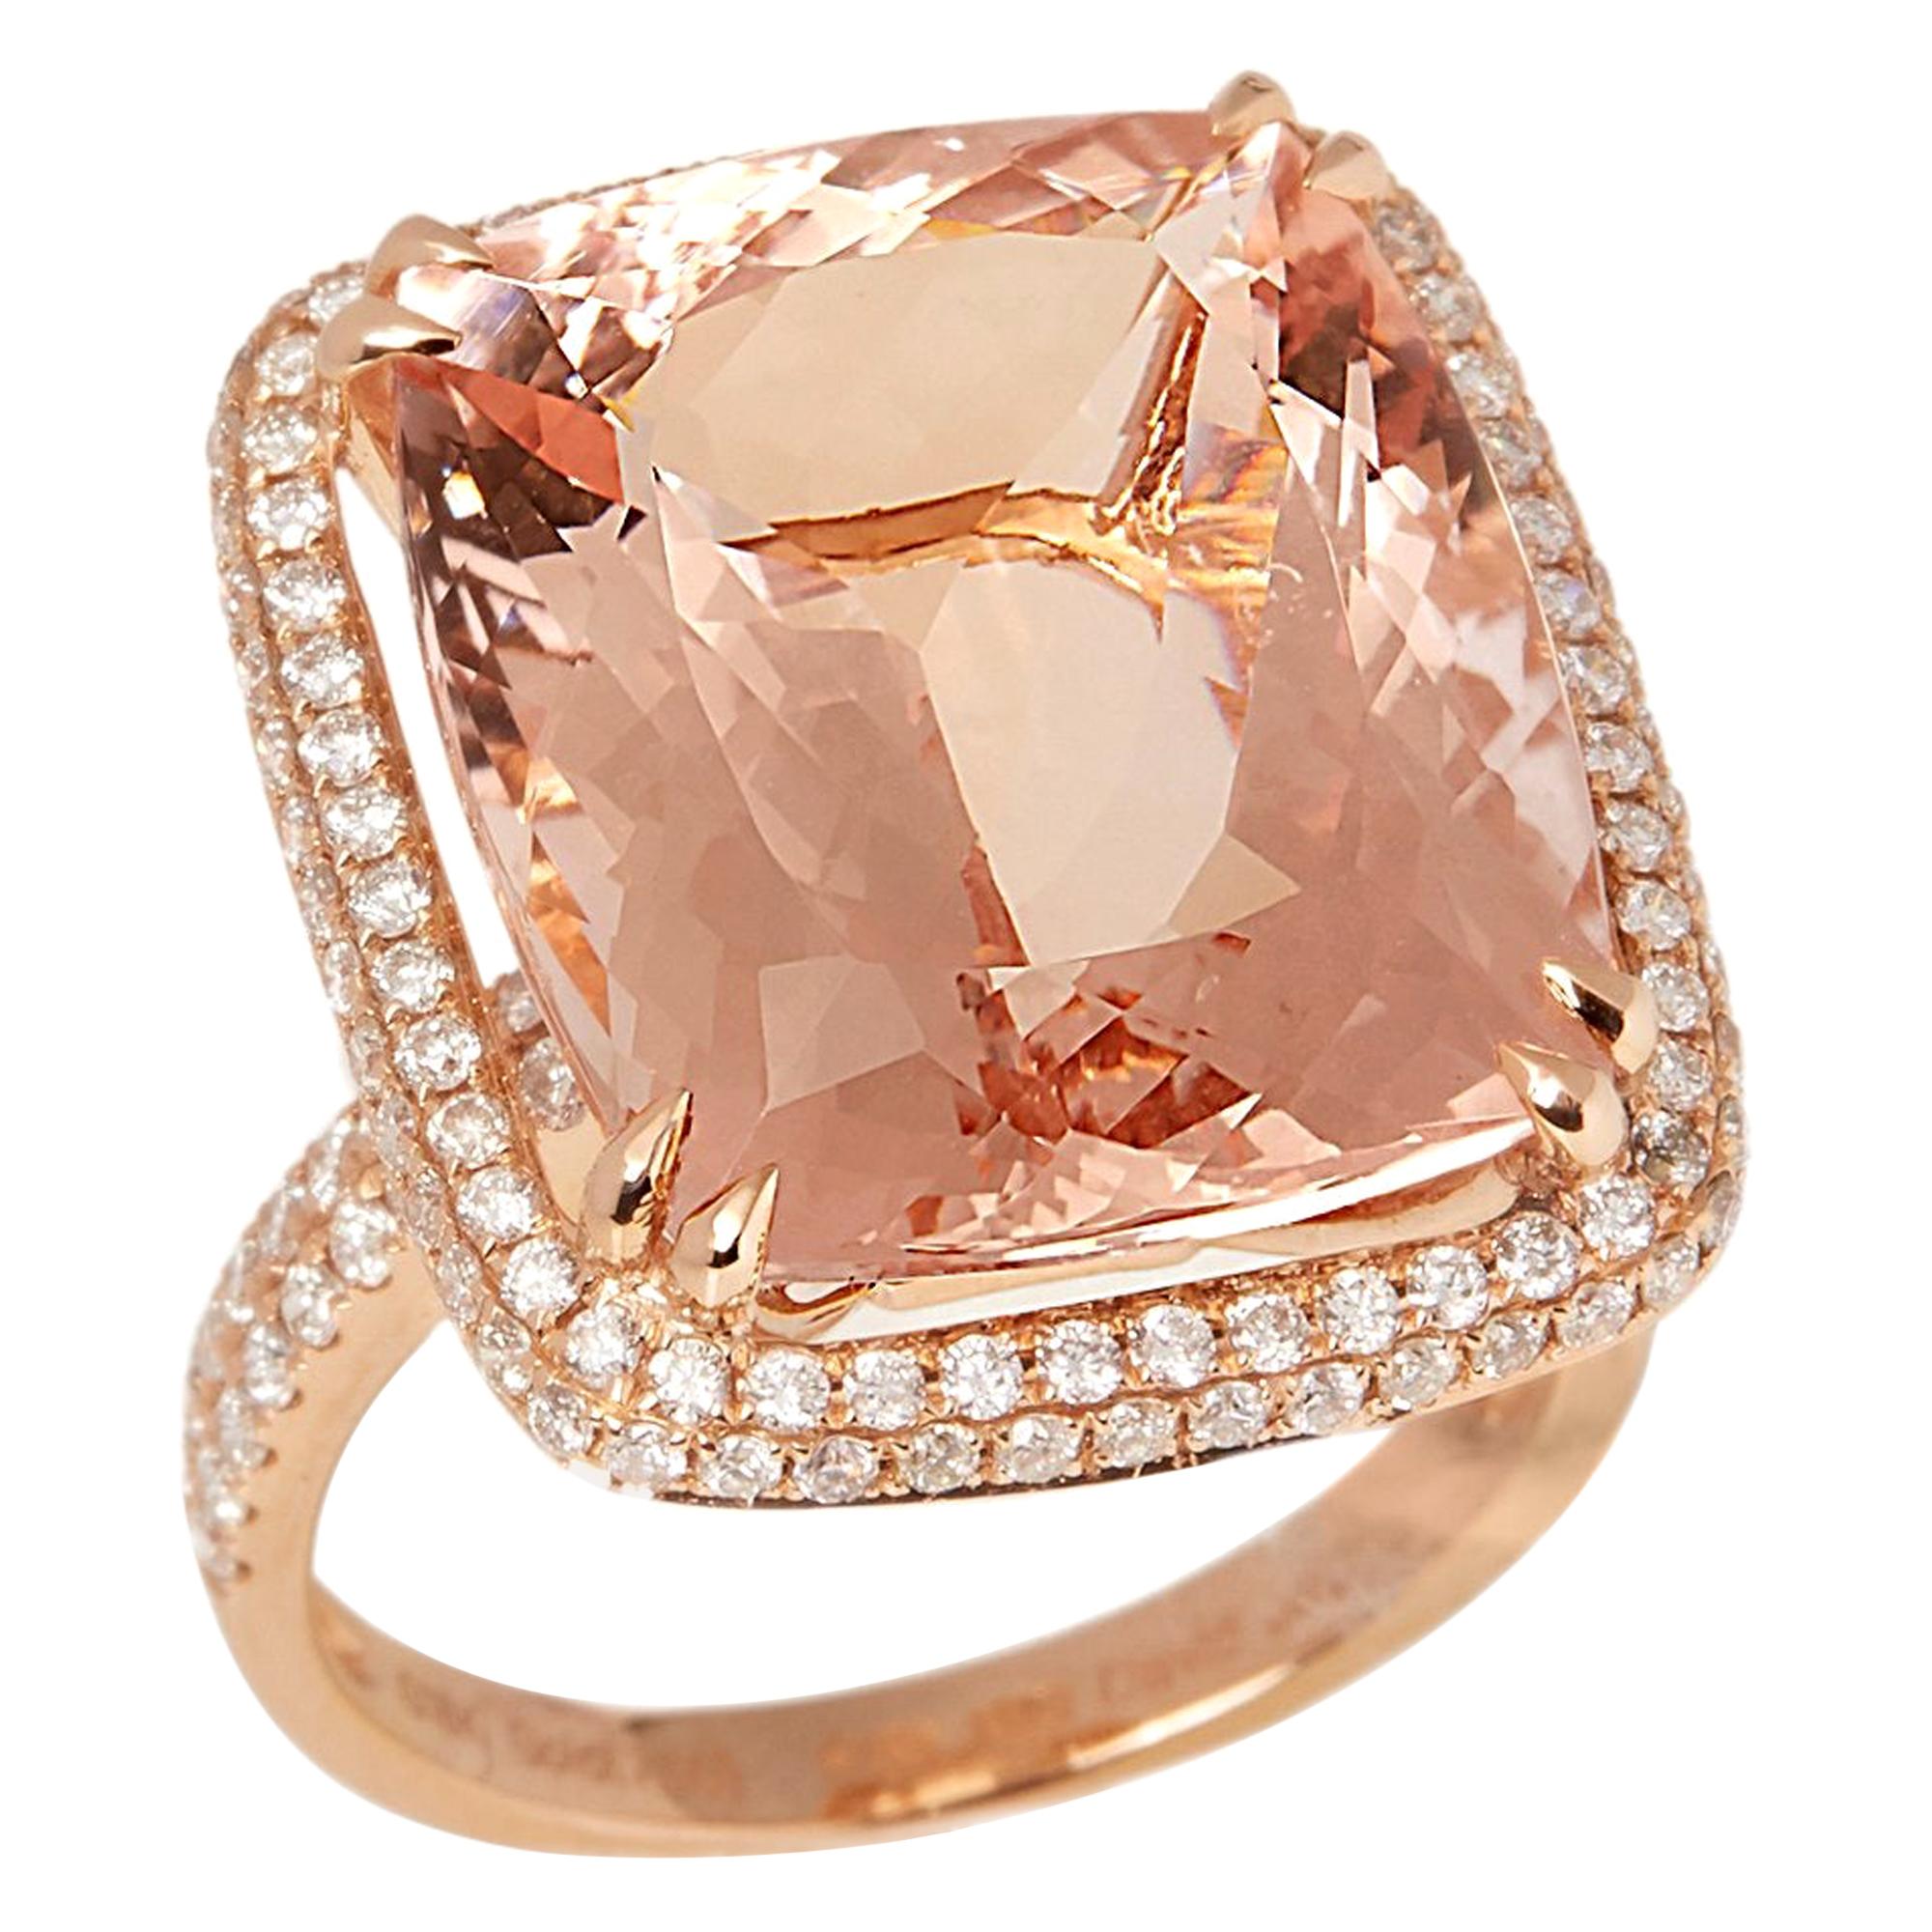 Certified 16.71ct Cushion Cut Brazilian Morganite and Diamond 18ct Gold Ring For Sale